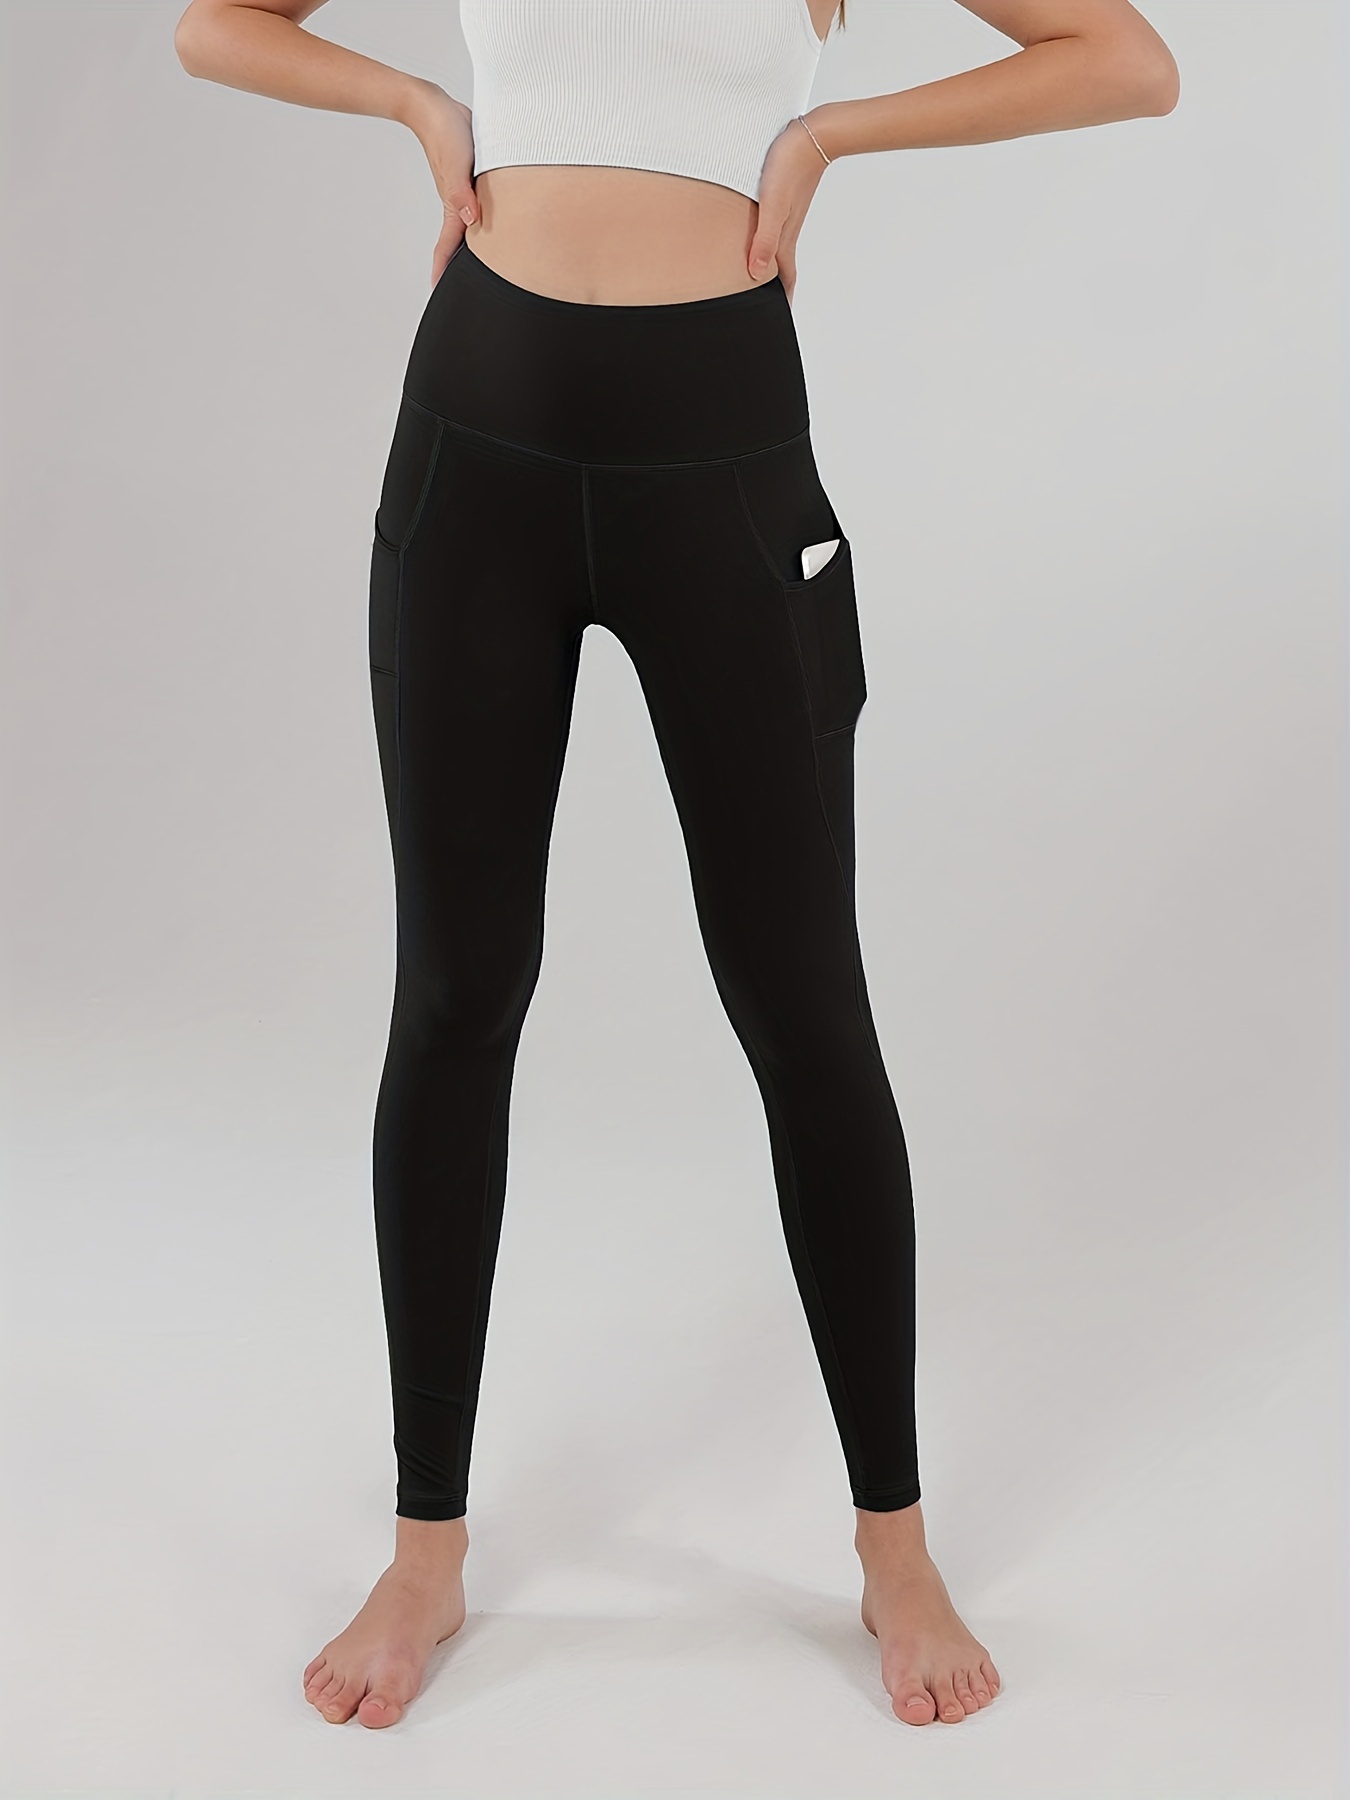 High Waisted Tummy Control Leggings-yoga-pants With Pockets Leggings for  Women 